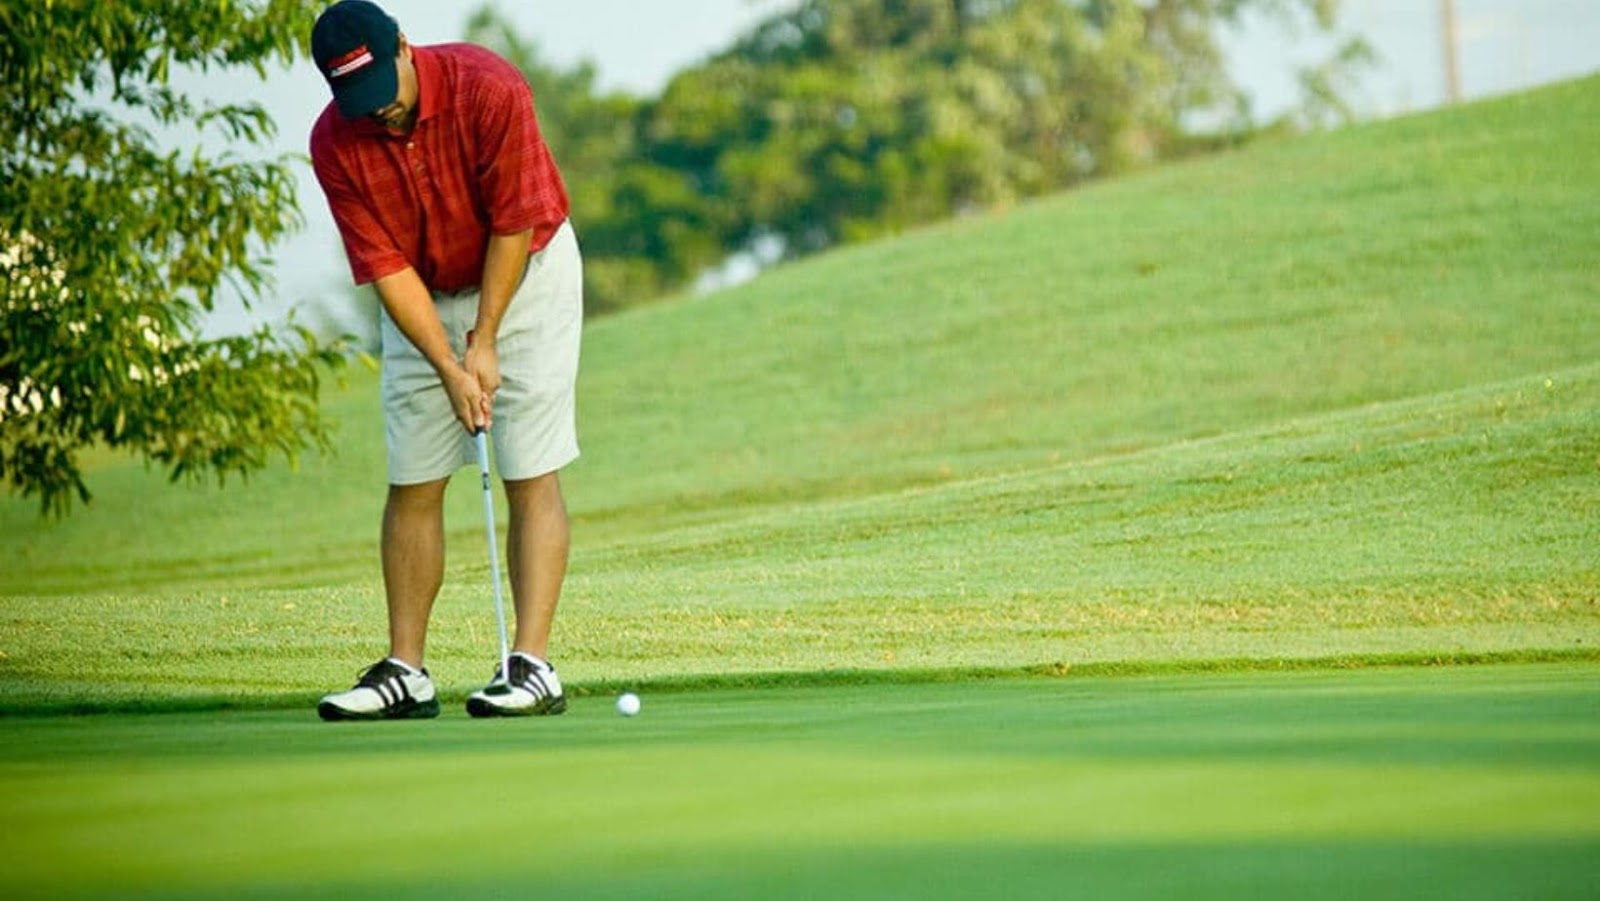 Golf is a Popular Sport Enjoyed by People all Over the World